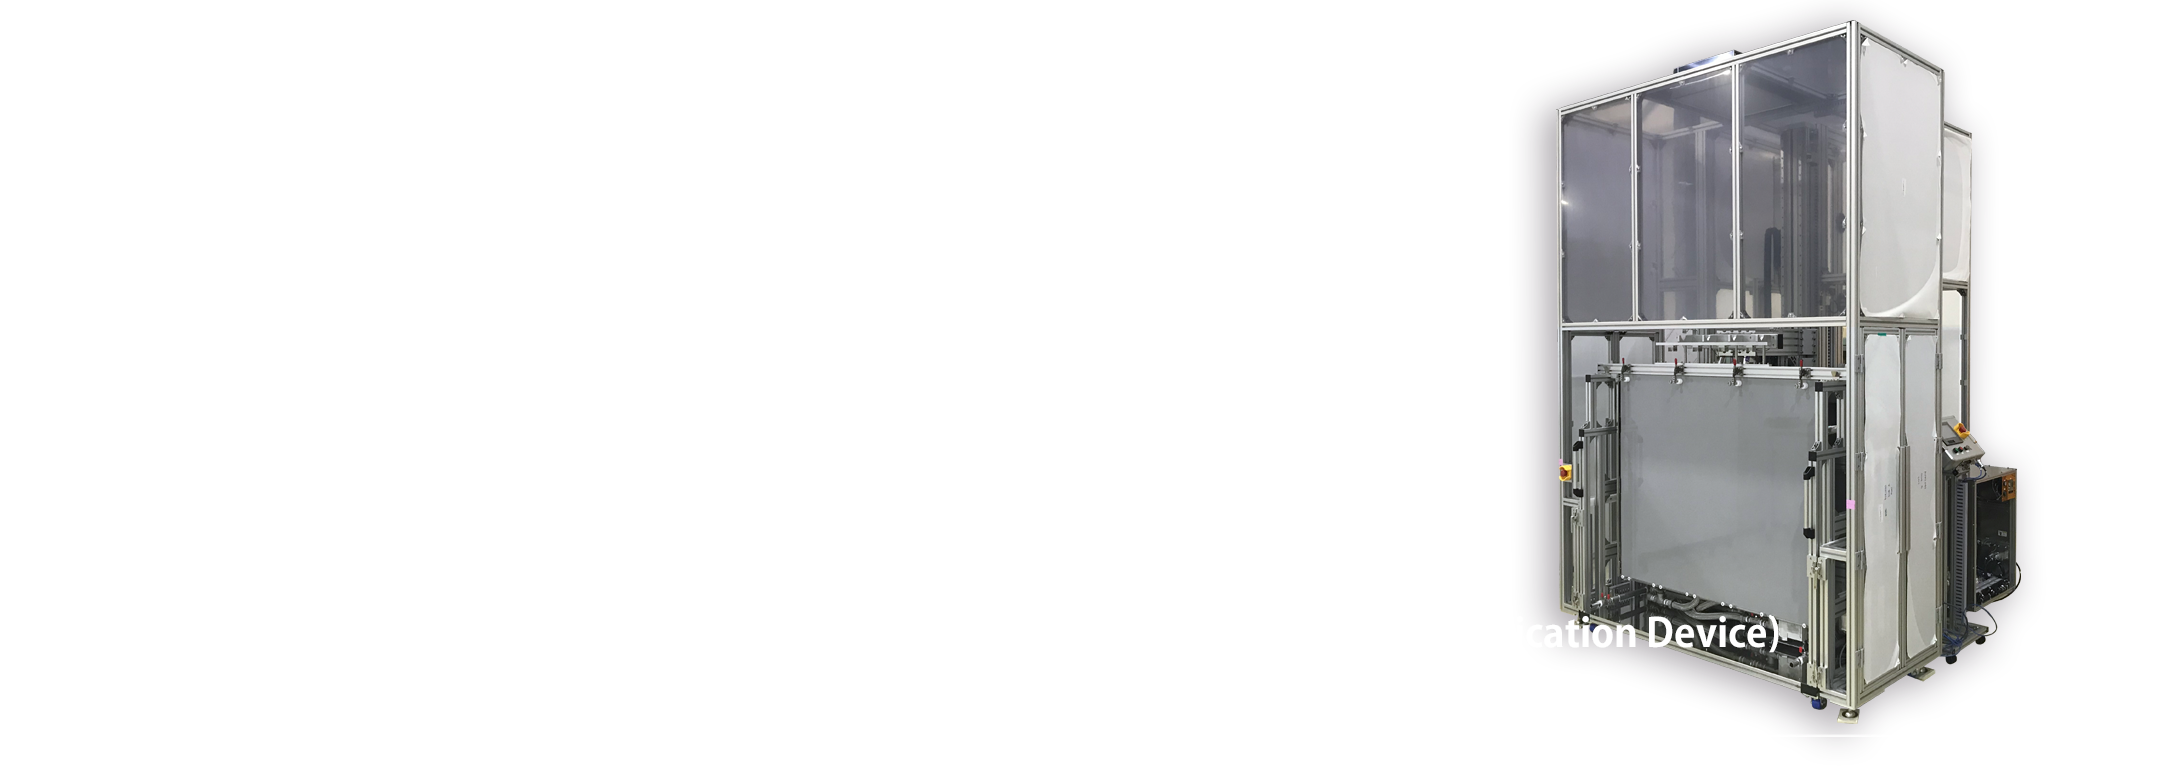 Nano-in Coater for Big Size Objects(Release Agent Application Device) NIC-2003